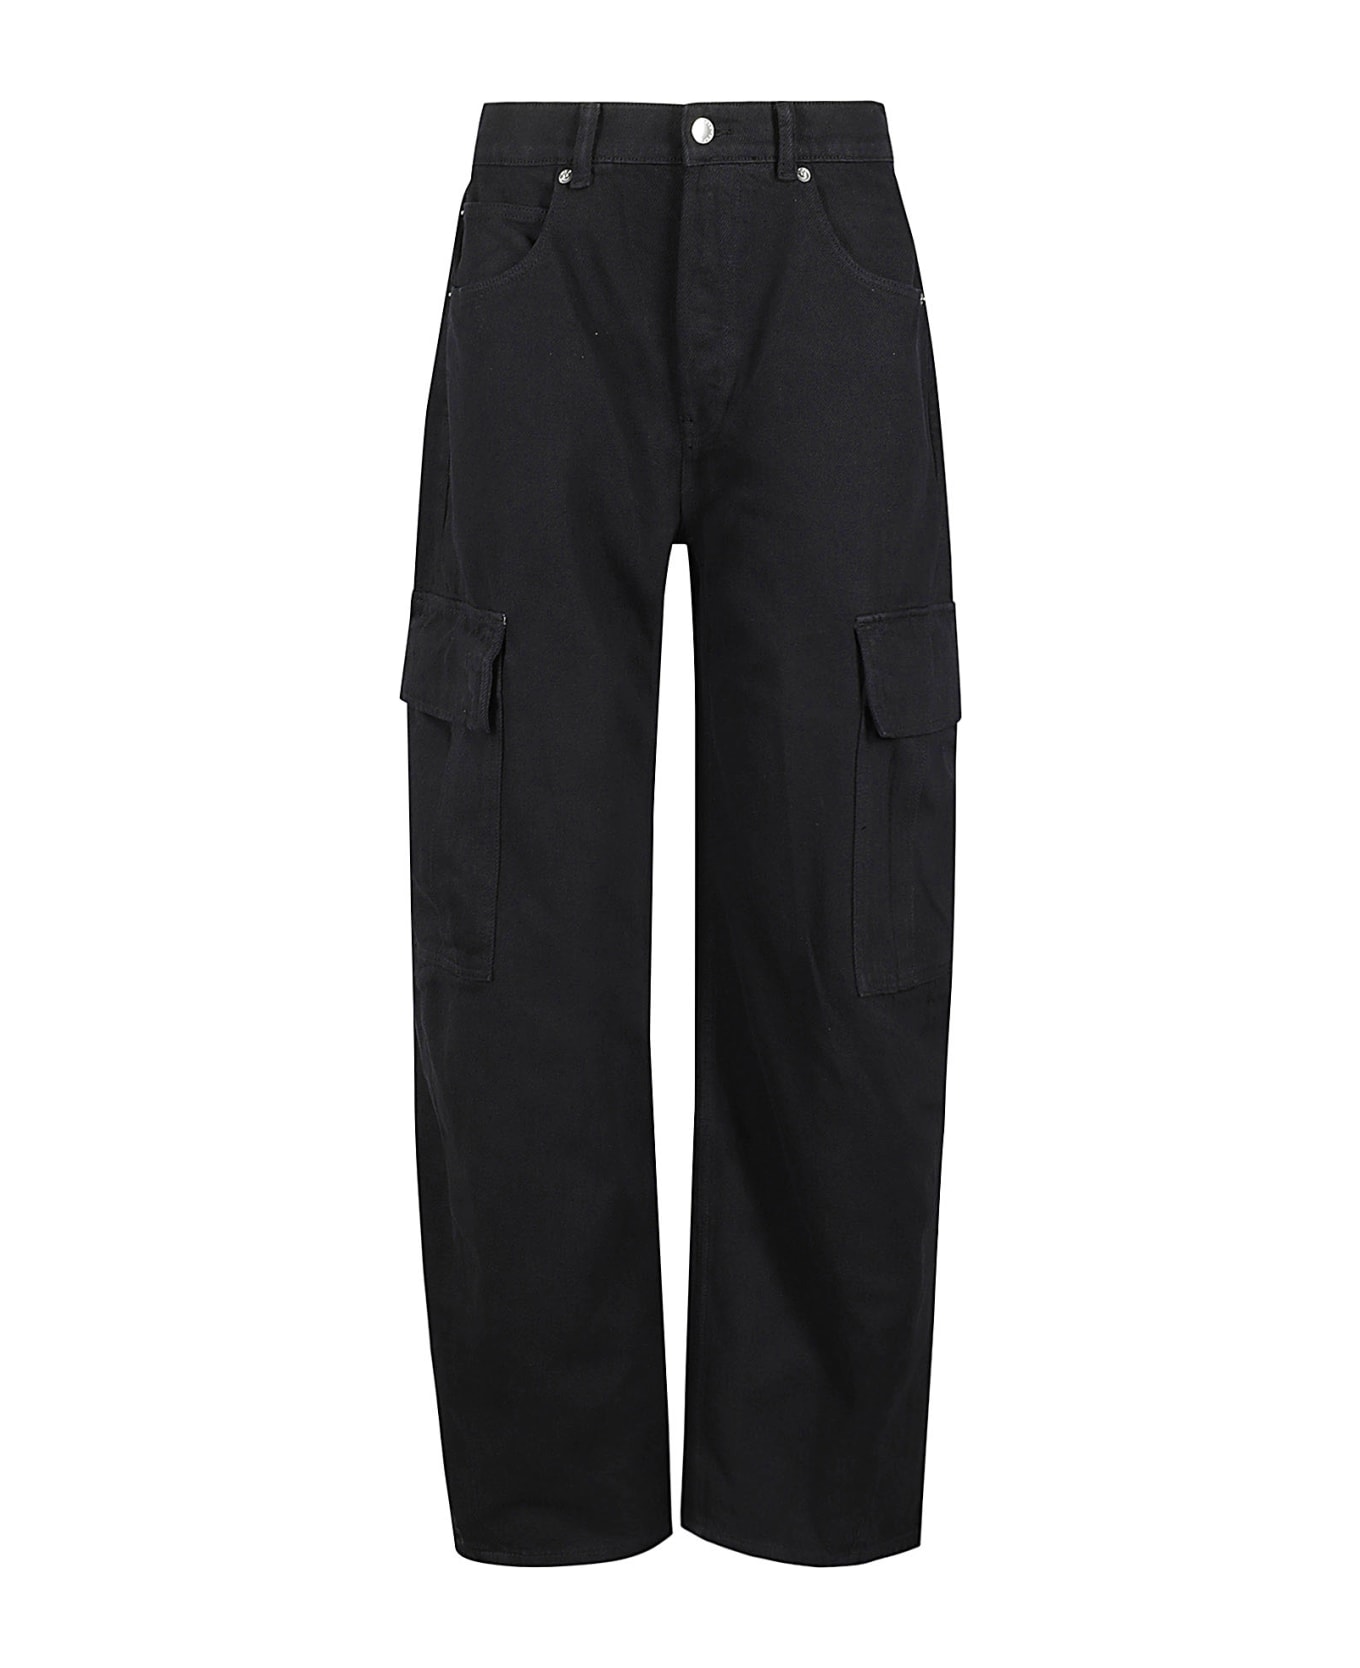 Alexander Wang Oversized Rounded Low Rise Jean Cargo Pocket